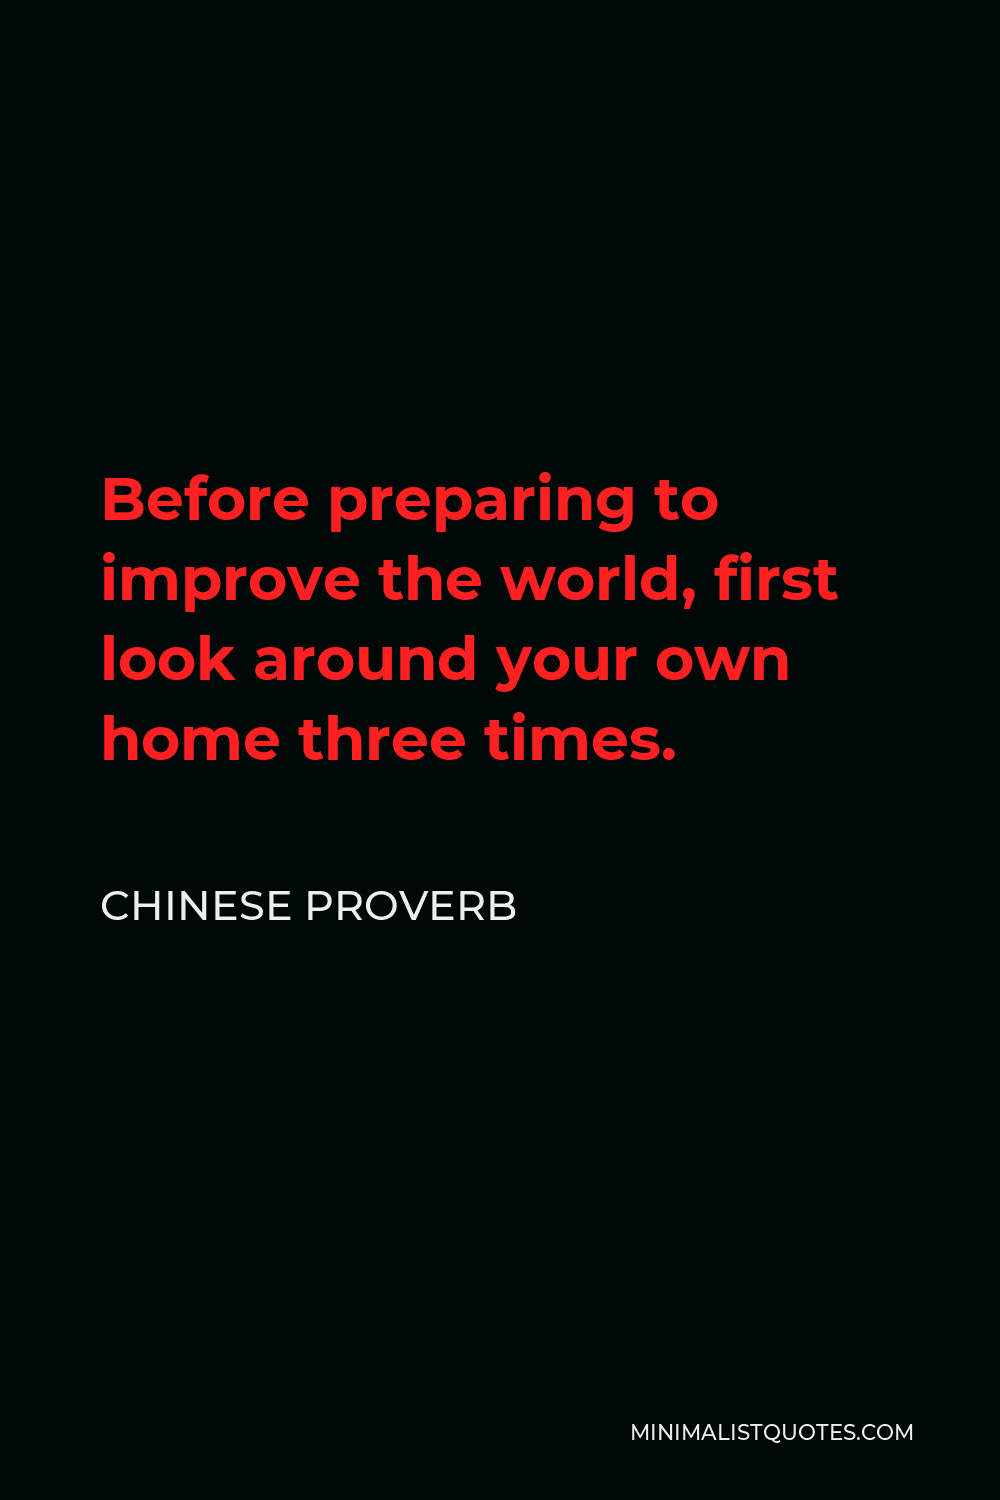 Chinese Proverb Quote - Before preparing to improve the world, first look around your own home three times.